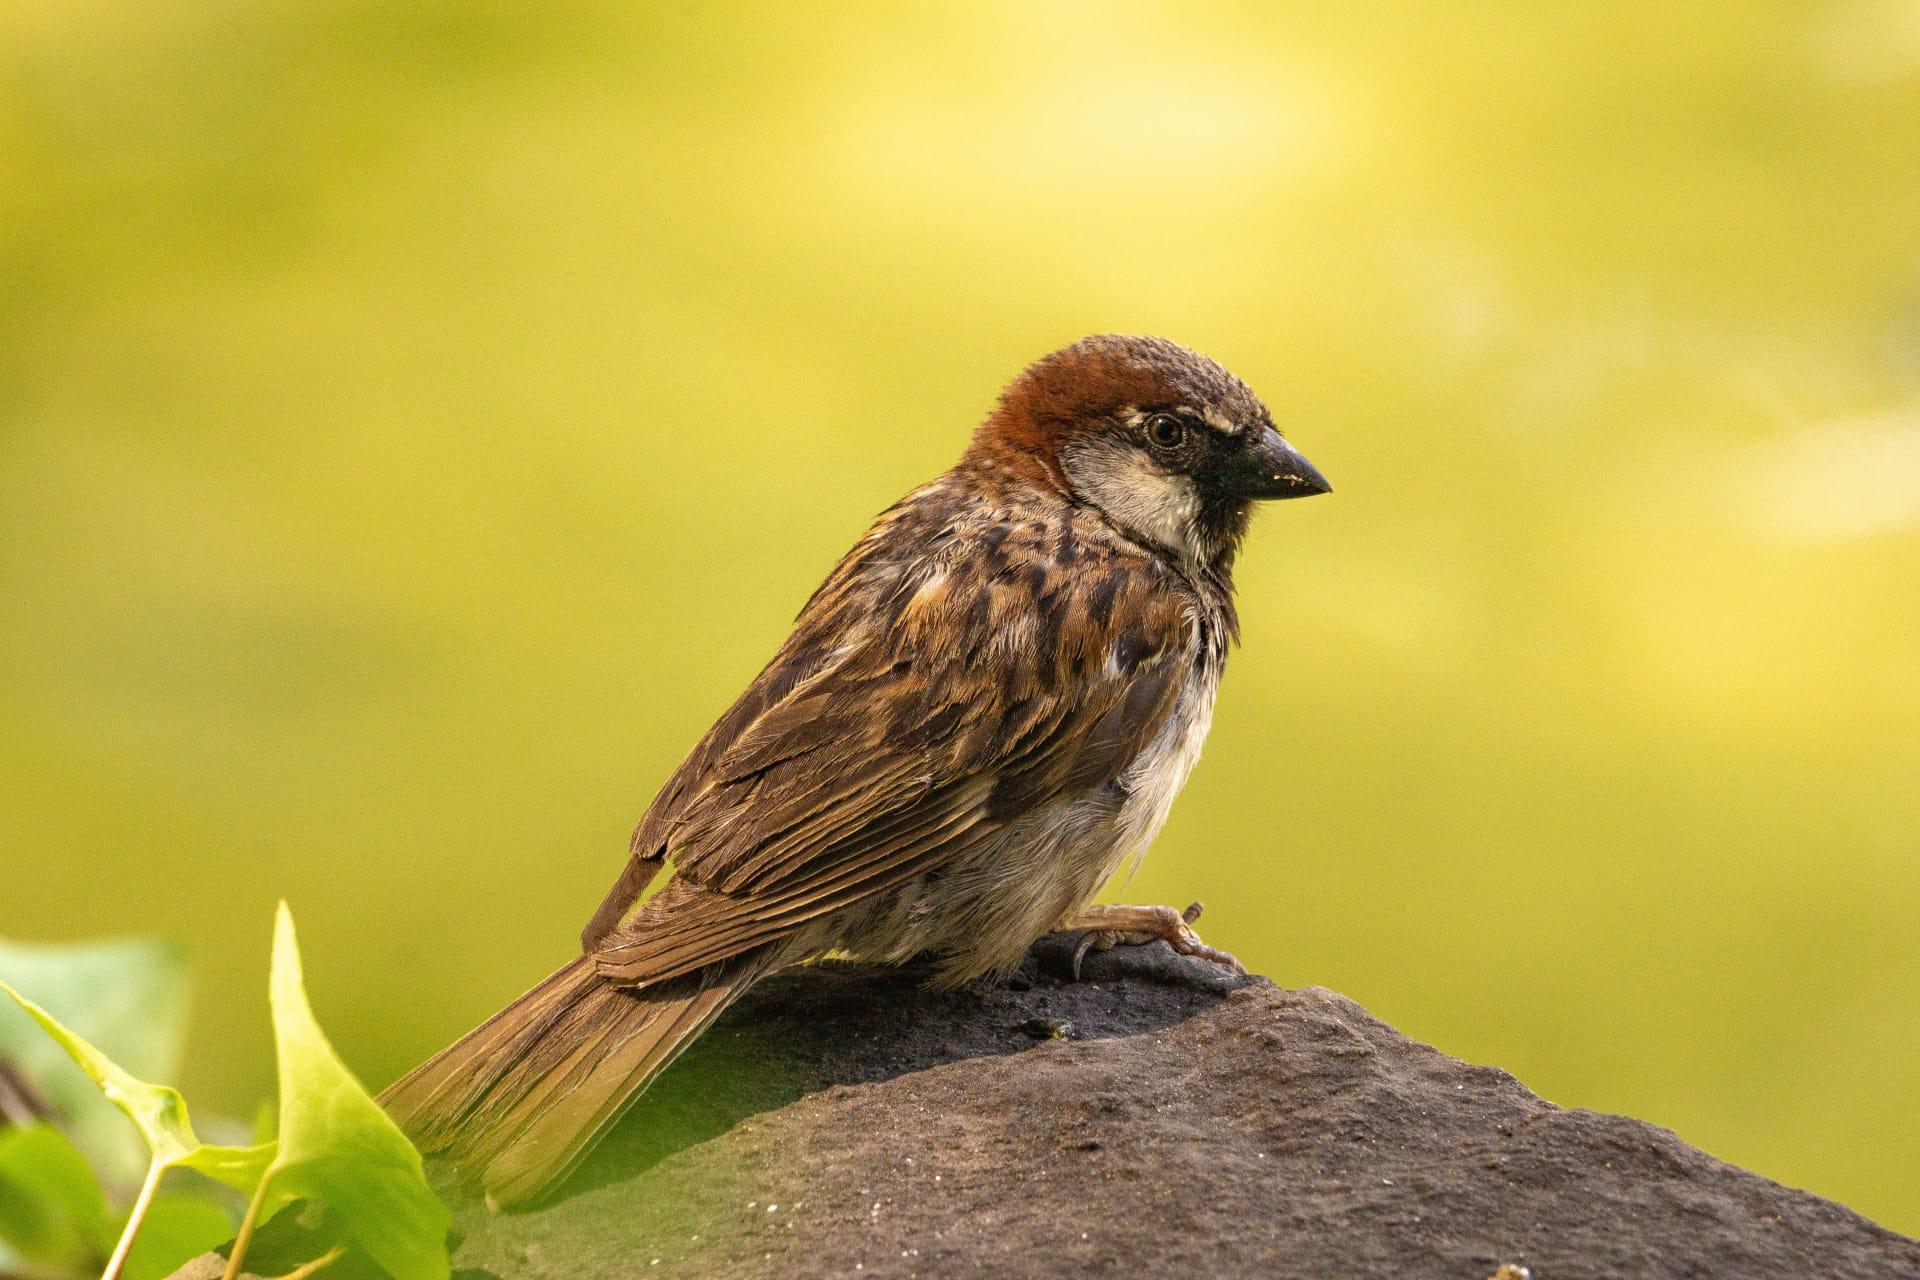 Sparrow pictures